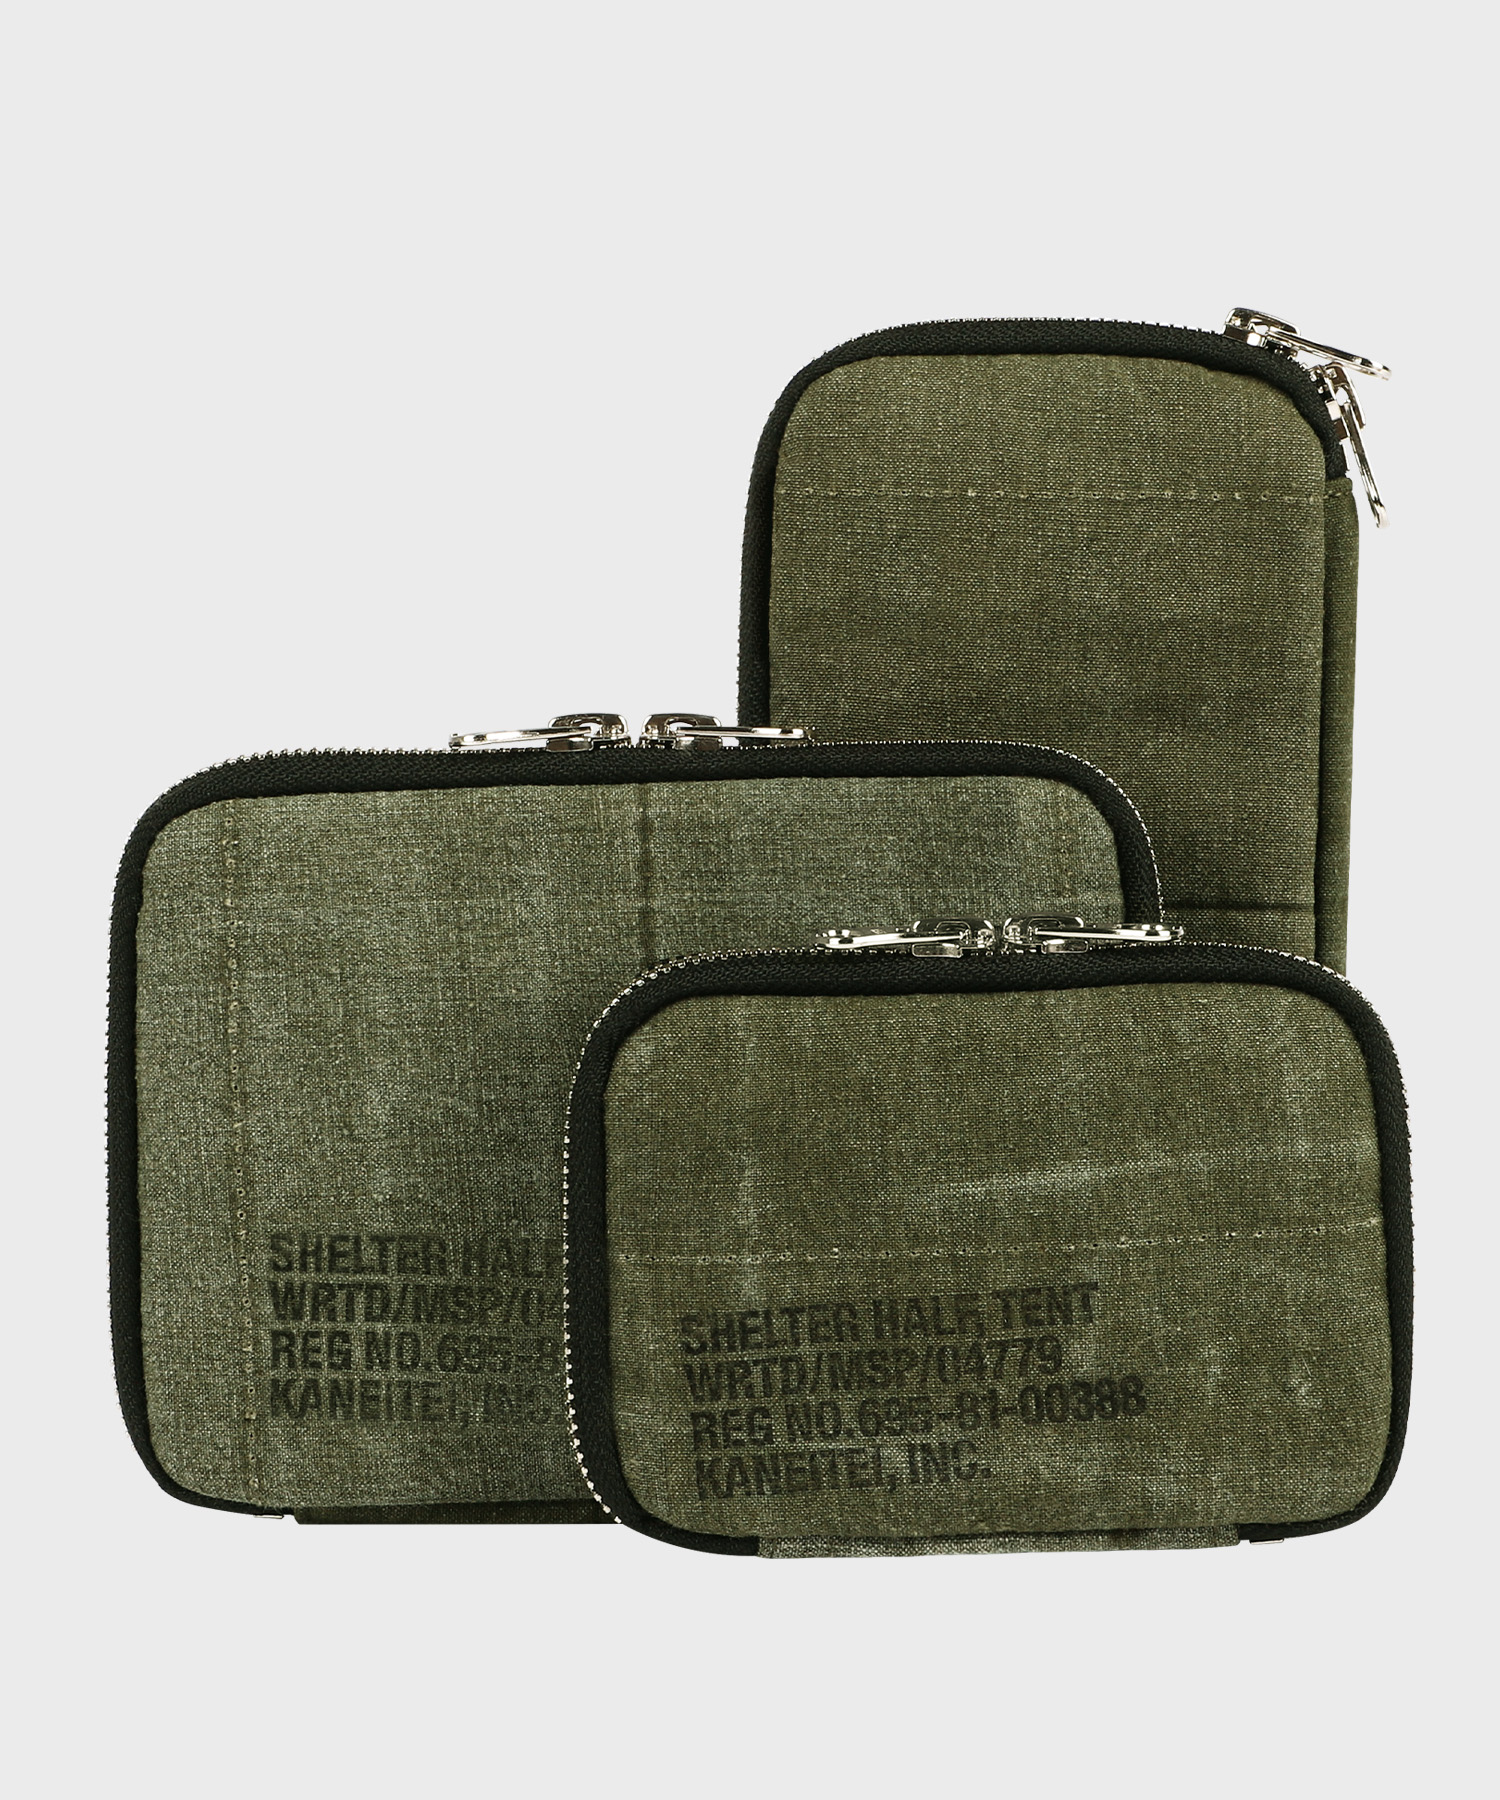 SEI ZIP WALLET (OLIVE DRAB) / UPCYCLED